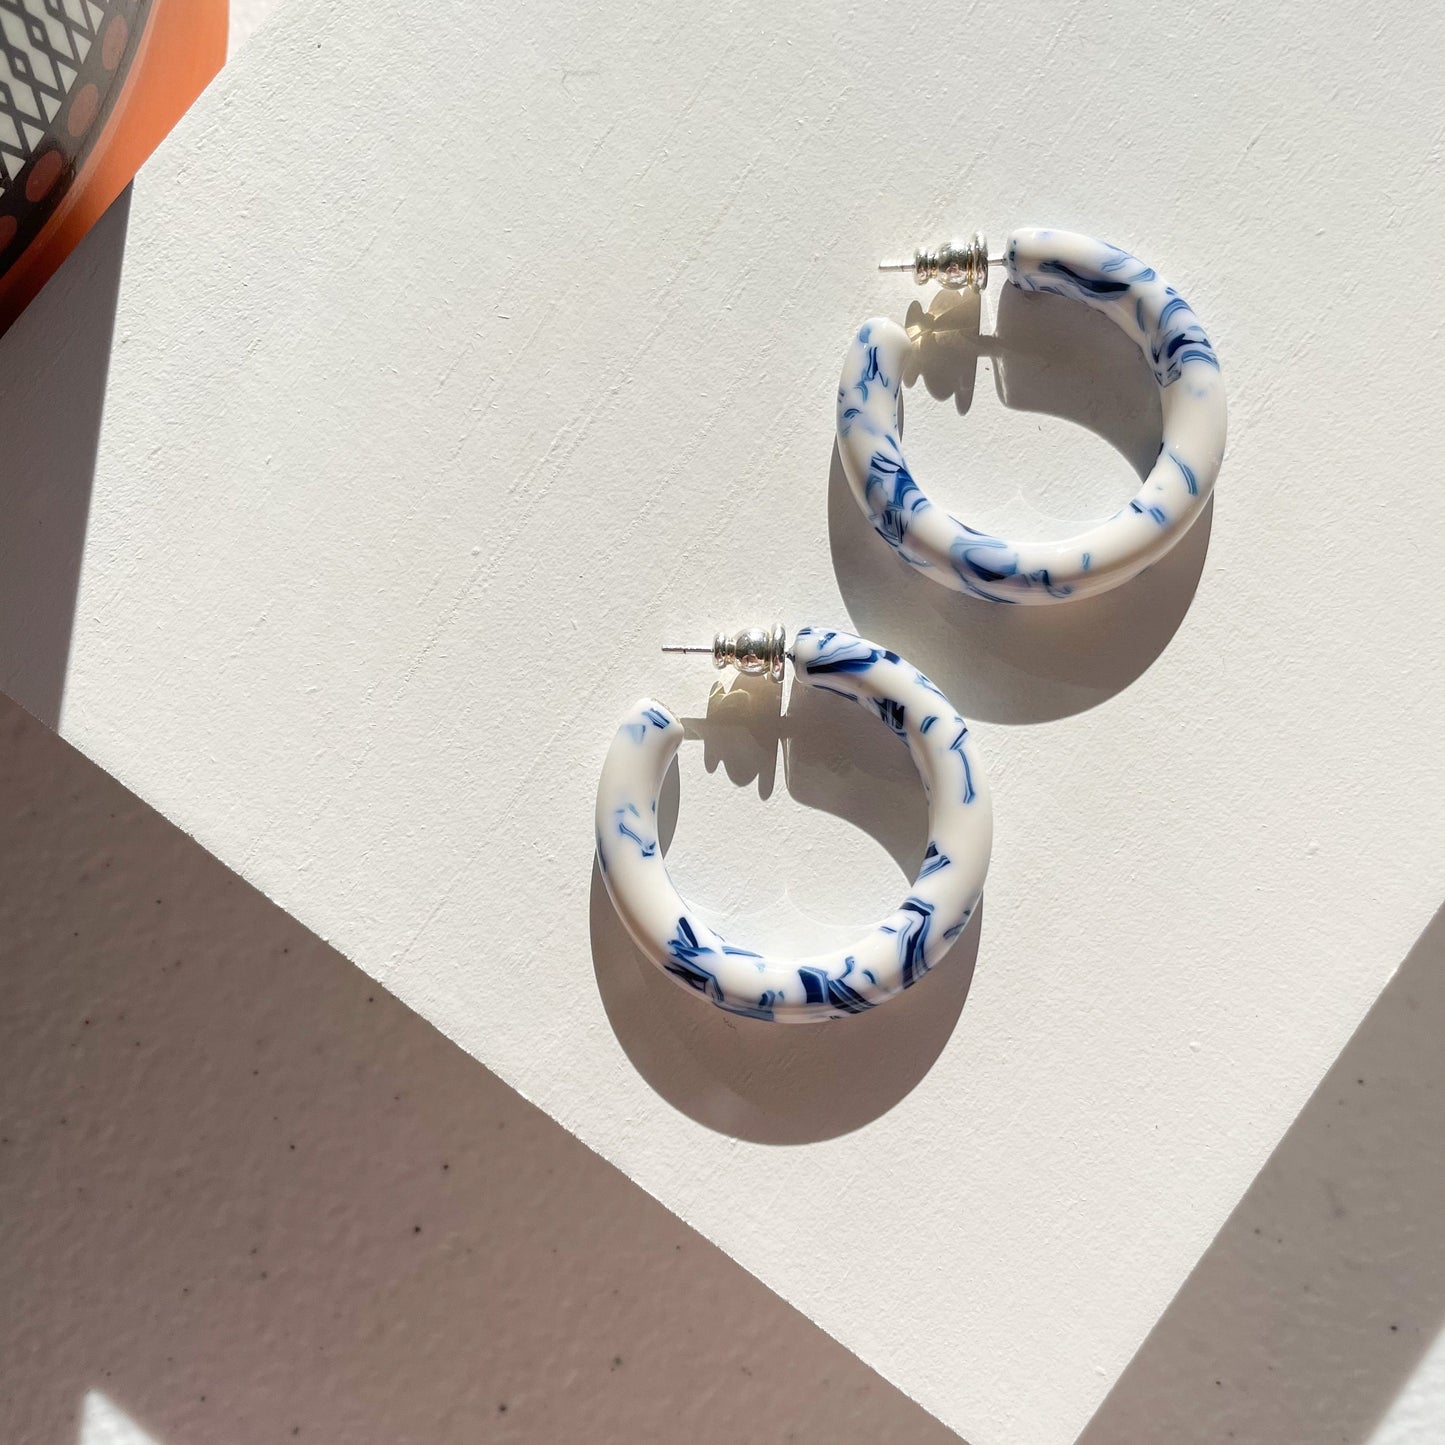 35mm Round Hoops in Porcelain | Thick Chunky White and Blue Hoop Earrings Cellulose Acetate Elegant Statement Chic 925 Sterling Silver Posts